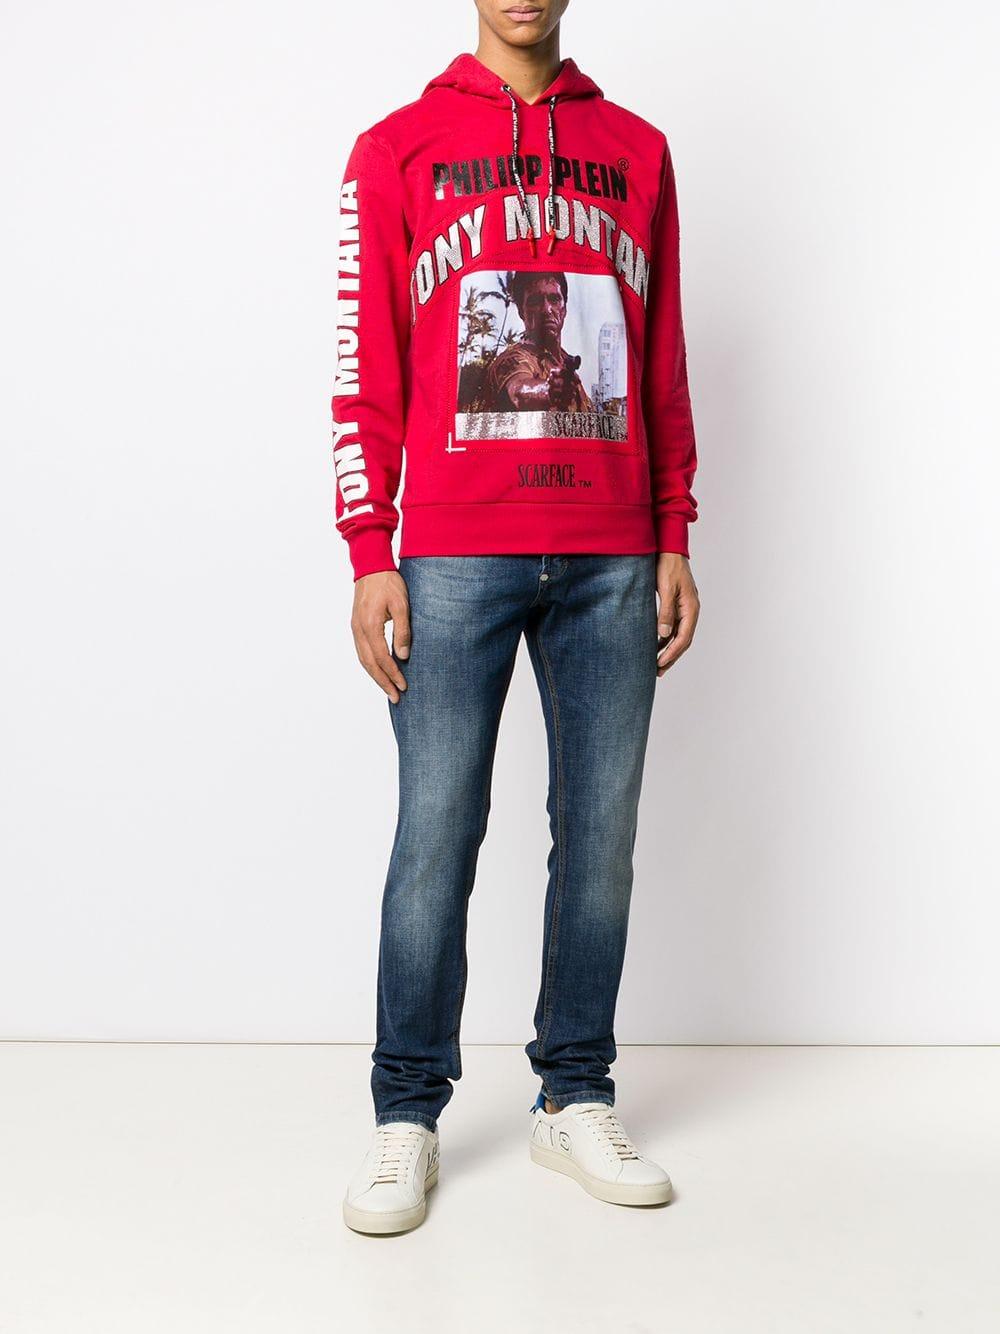 Philipp Plein Cotton Scarface Hoodie in Red for Men - Lyst